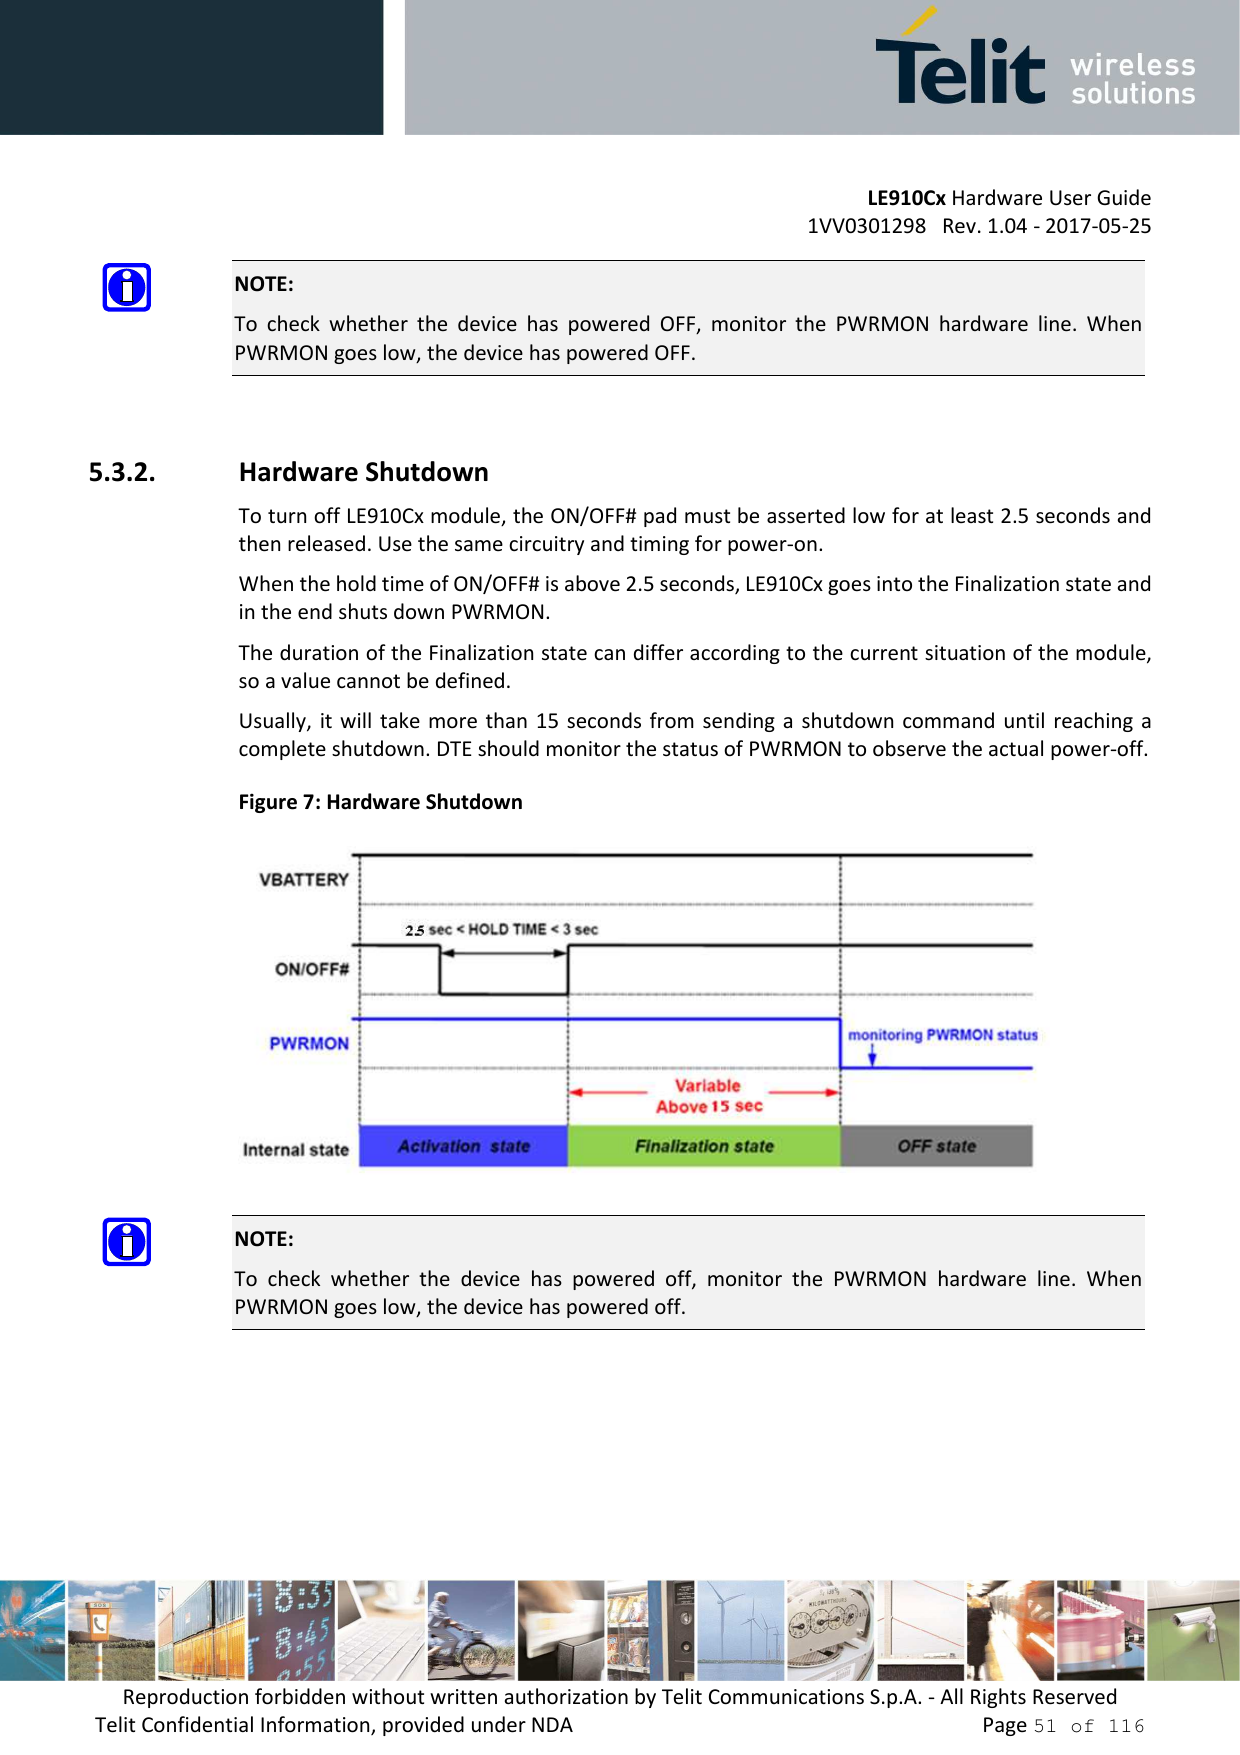         LE910Cx Hardware User Guide 1VV0301298   Rev. 1.04 - 2017-05-25 Reproduction forbidden without written authorization by Telit Communications S.p.A. - All Rights Reserved Telit Confidential Information, provided under NDA                 Page 51 of 116  NOTE: To  check  whether  the  device  has  powered  OFF,  monitor  the  PWRMON  hardware  line.  When PWRMON goes low, the device has powered OFF.  5.3.2. Hardware Shutdown To turn off LE910Cx module, the ON/OFF# pad must be asserted low for at least 2.5 seconds and then released. Use the same circuitry and timing for power-on. When the hold time of ON/OFF# is above 2.5 seconds, LE910Cx goes into the Finalization state and in the end shuts down PWRMON. The duration of the Finalization state can differ according to the current situation of the module, so a value cannot be defined. Usually, it will  take more than  15  seconds from  sending a  shutdown  command until  reaching a complete shutdown. DTE should monitor the status of PWRMON to observe the actual power-off. Figure 7: Hardware Shutdown   NOTE: To  check  whether  the  device  has  powered  off,  monitor  the  PWRMON  hardware  line.  When PWRMON goes low, the device has powered off.    